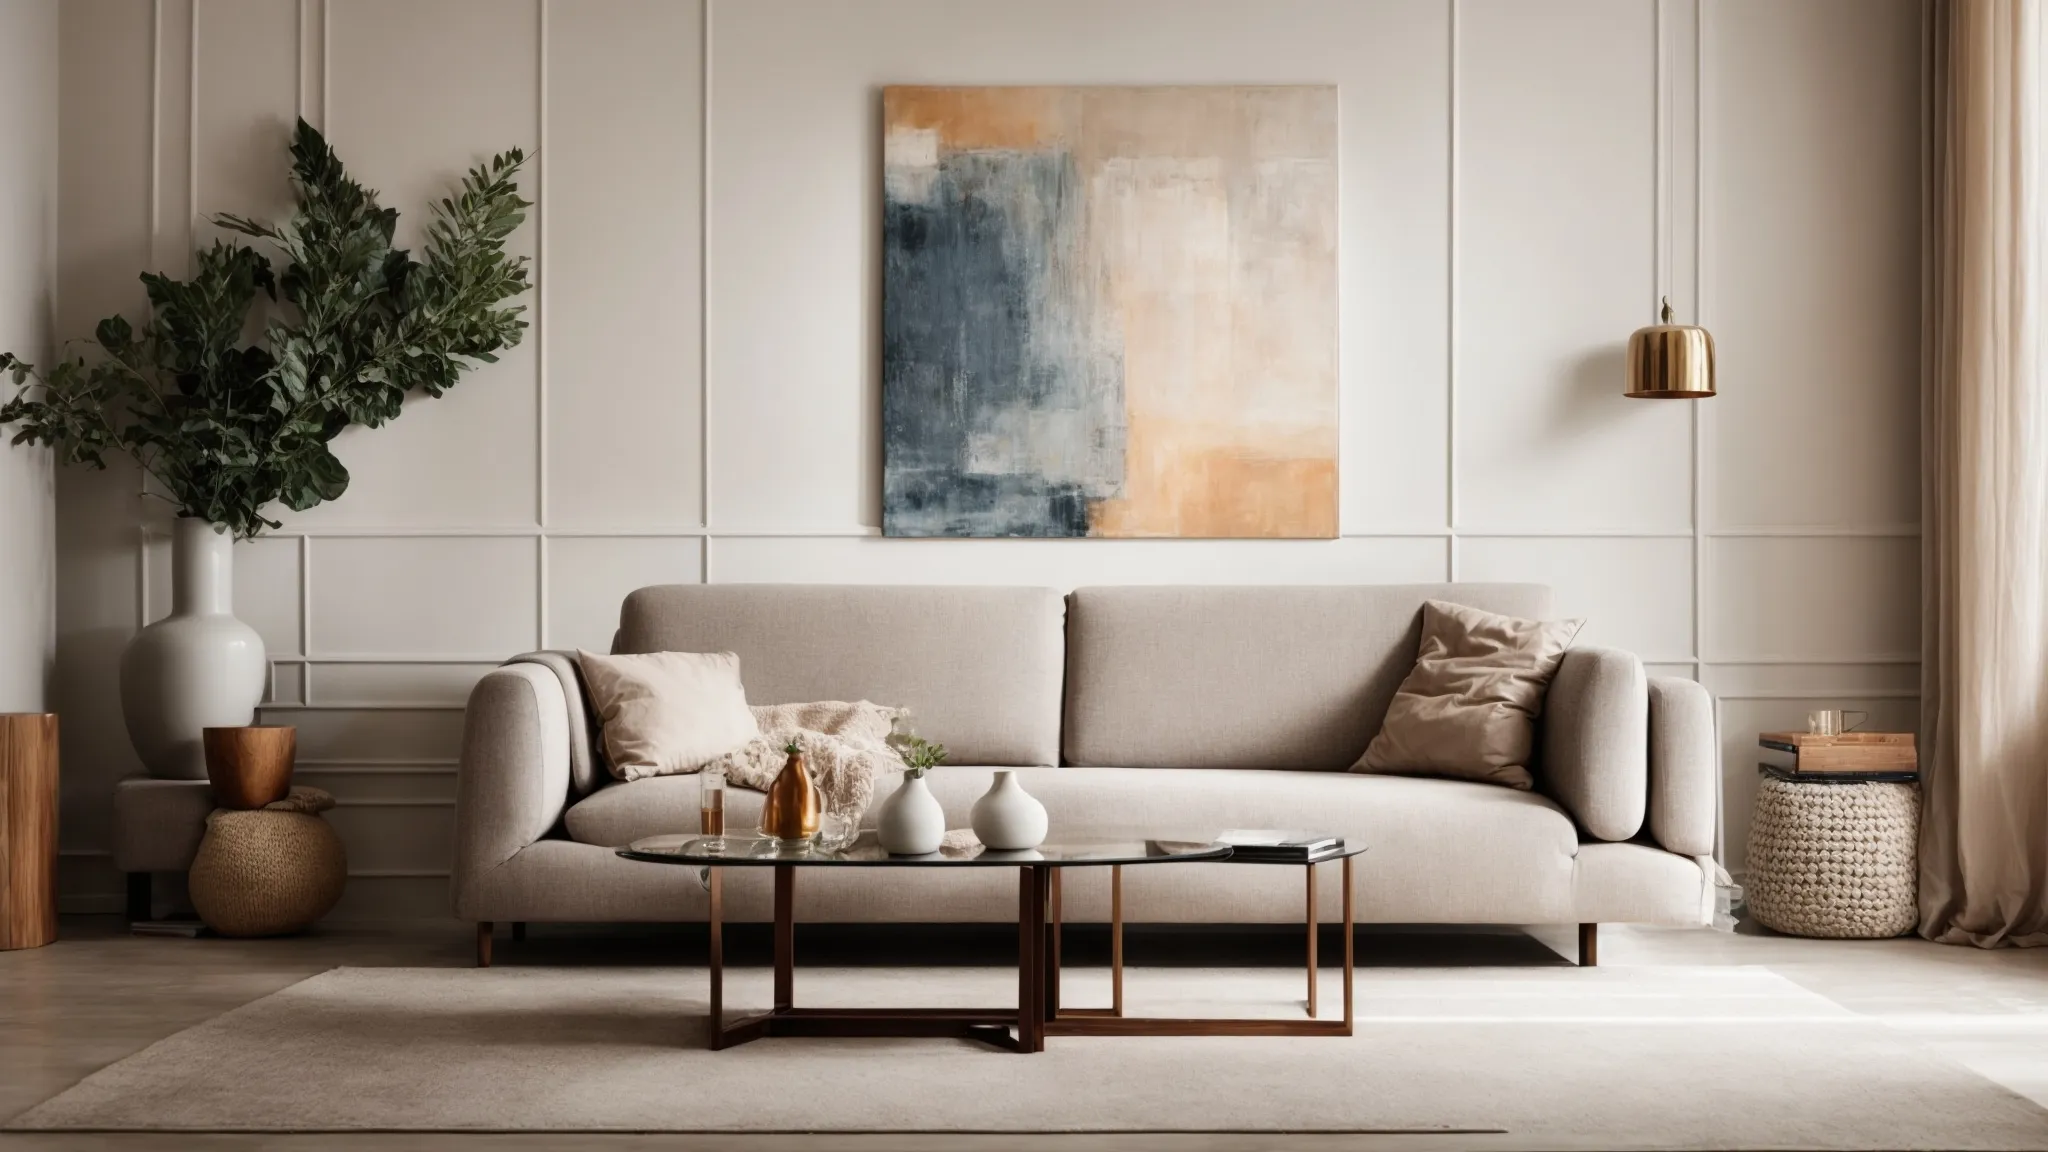 a chic living room with a modern sofa, coffee table, and abstract wall art, without any visible brand names or intricate details.